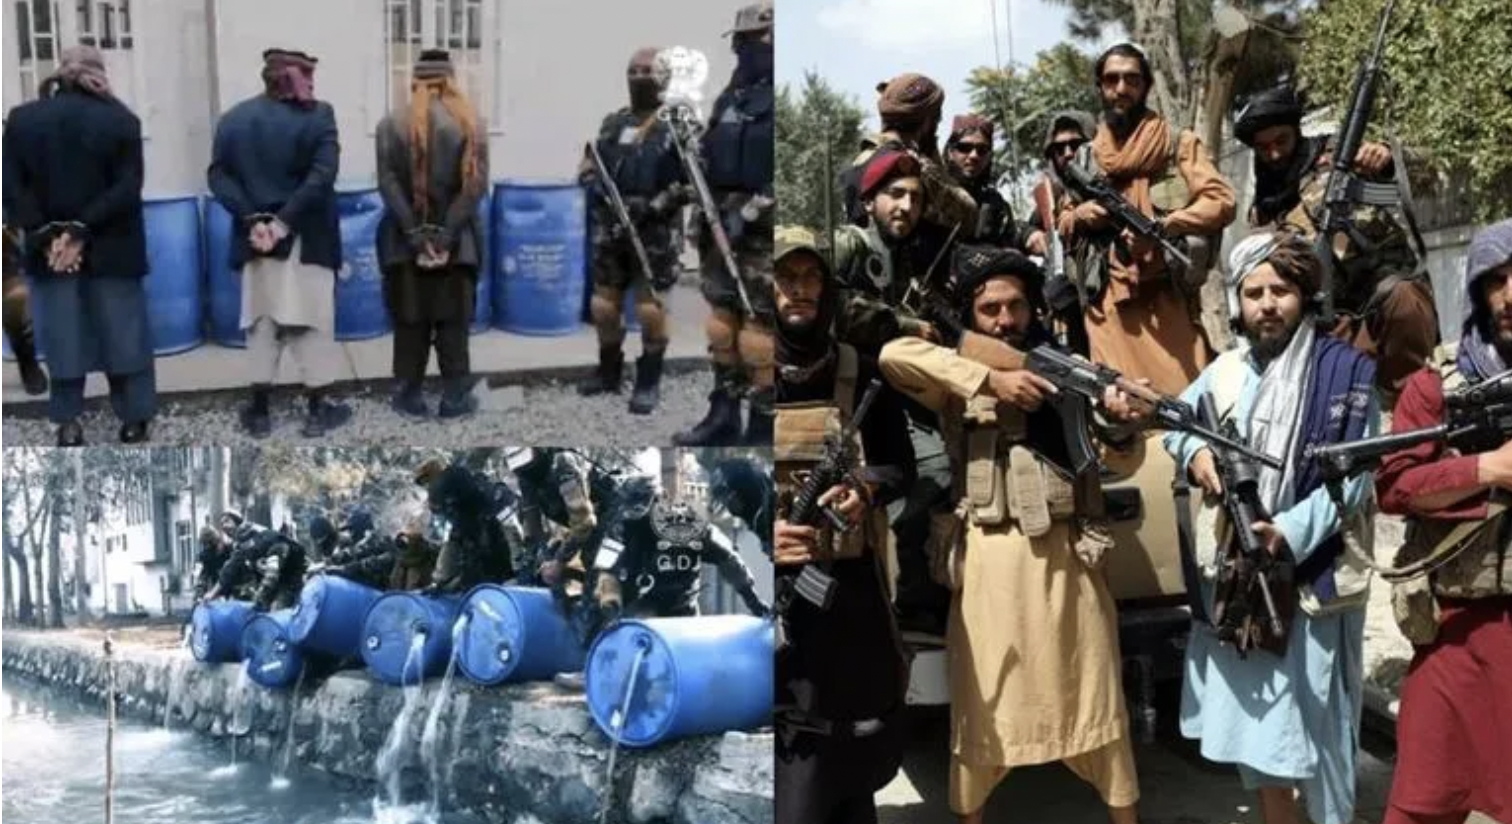 3,000 litres of alcohol were poured into kabul canal by talibans